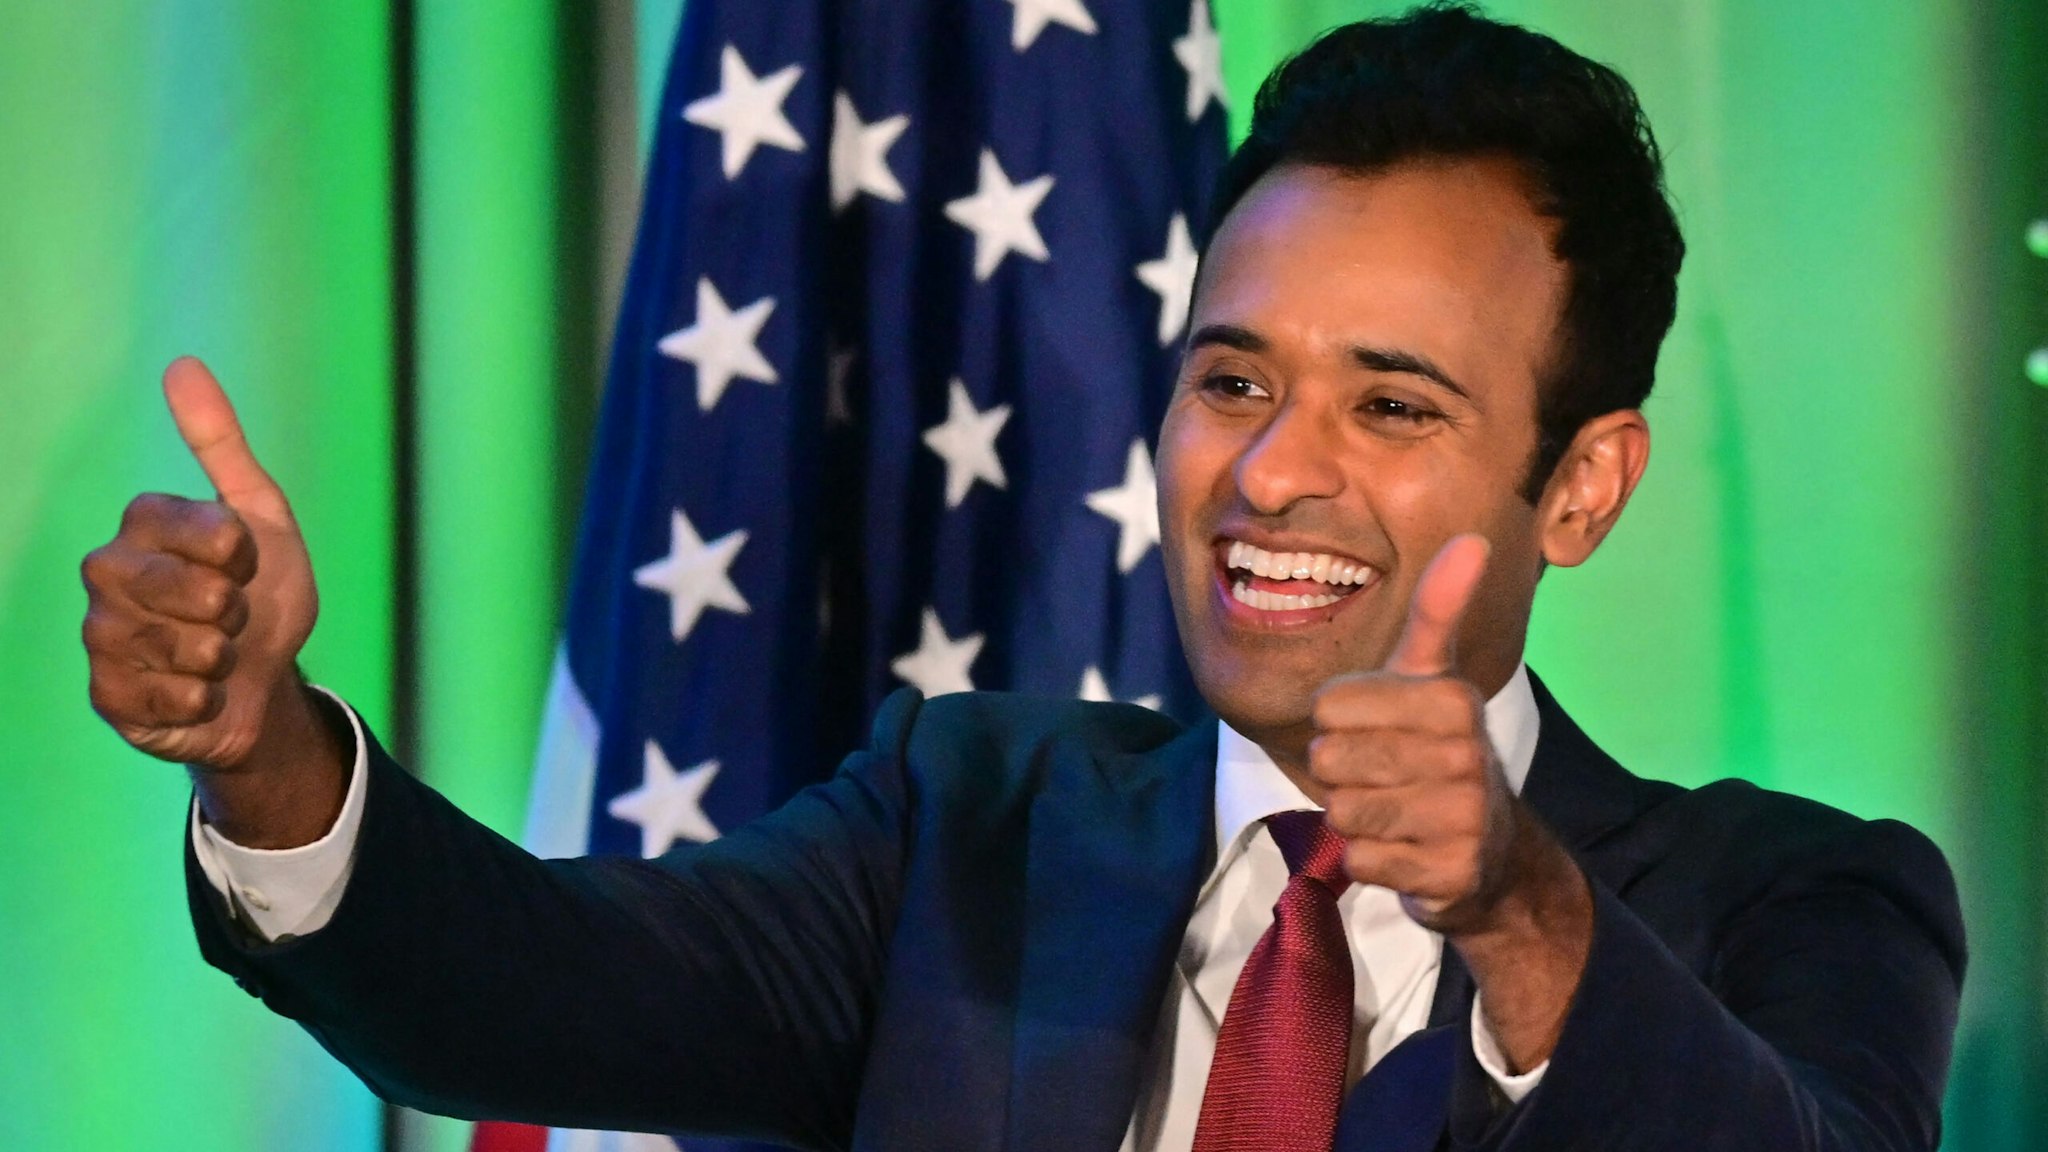 Entrepreneur and 2024 presidential hopeful Vivek Ramaswamy arrives to speak during the California Republican Party (CAGOP) Fall 2023 Convention in Anaheim, California, on September 30, 2023.